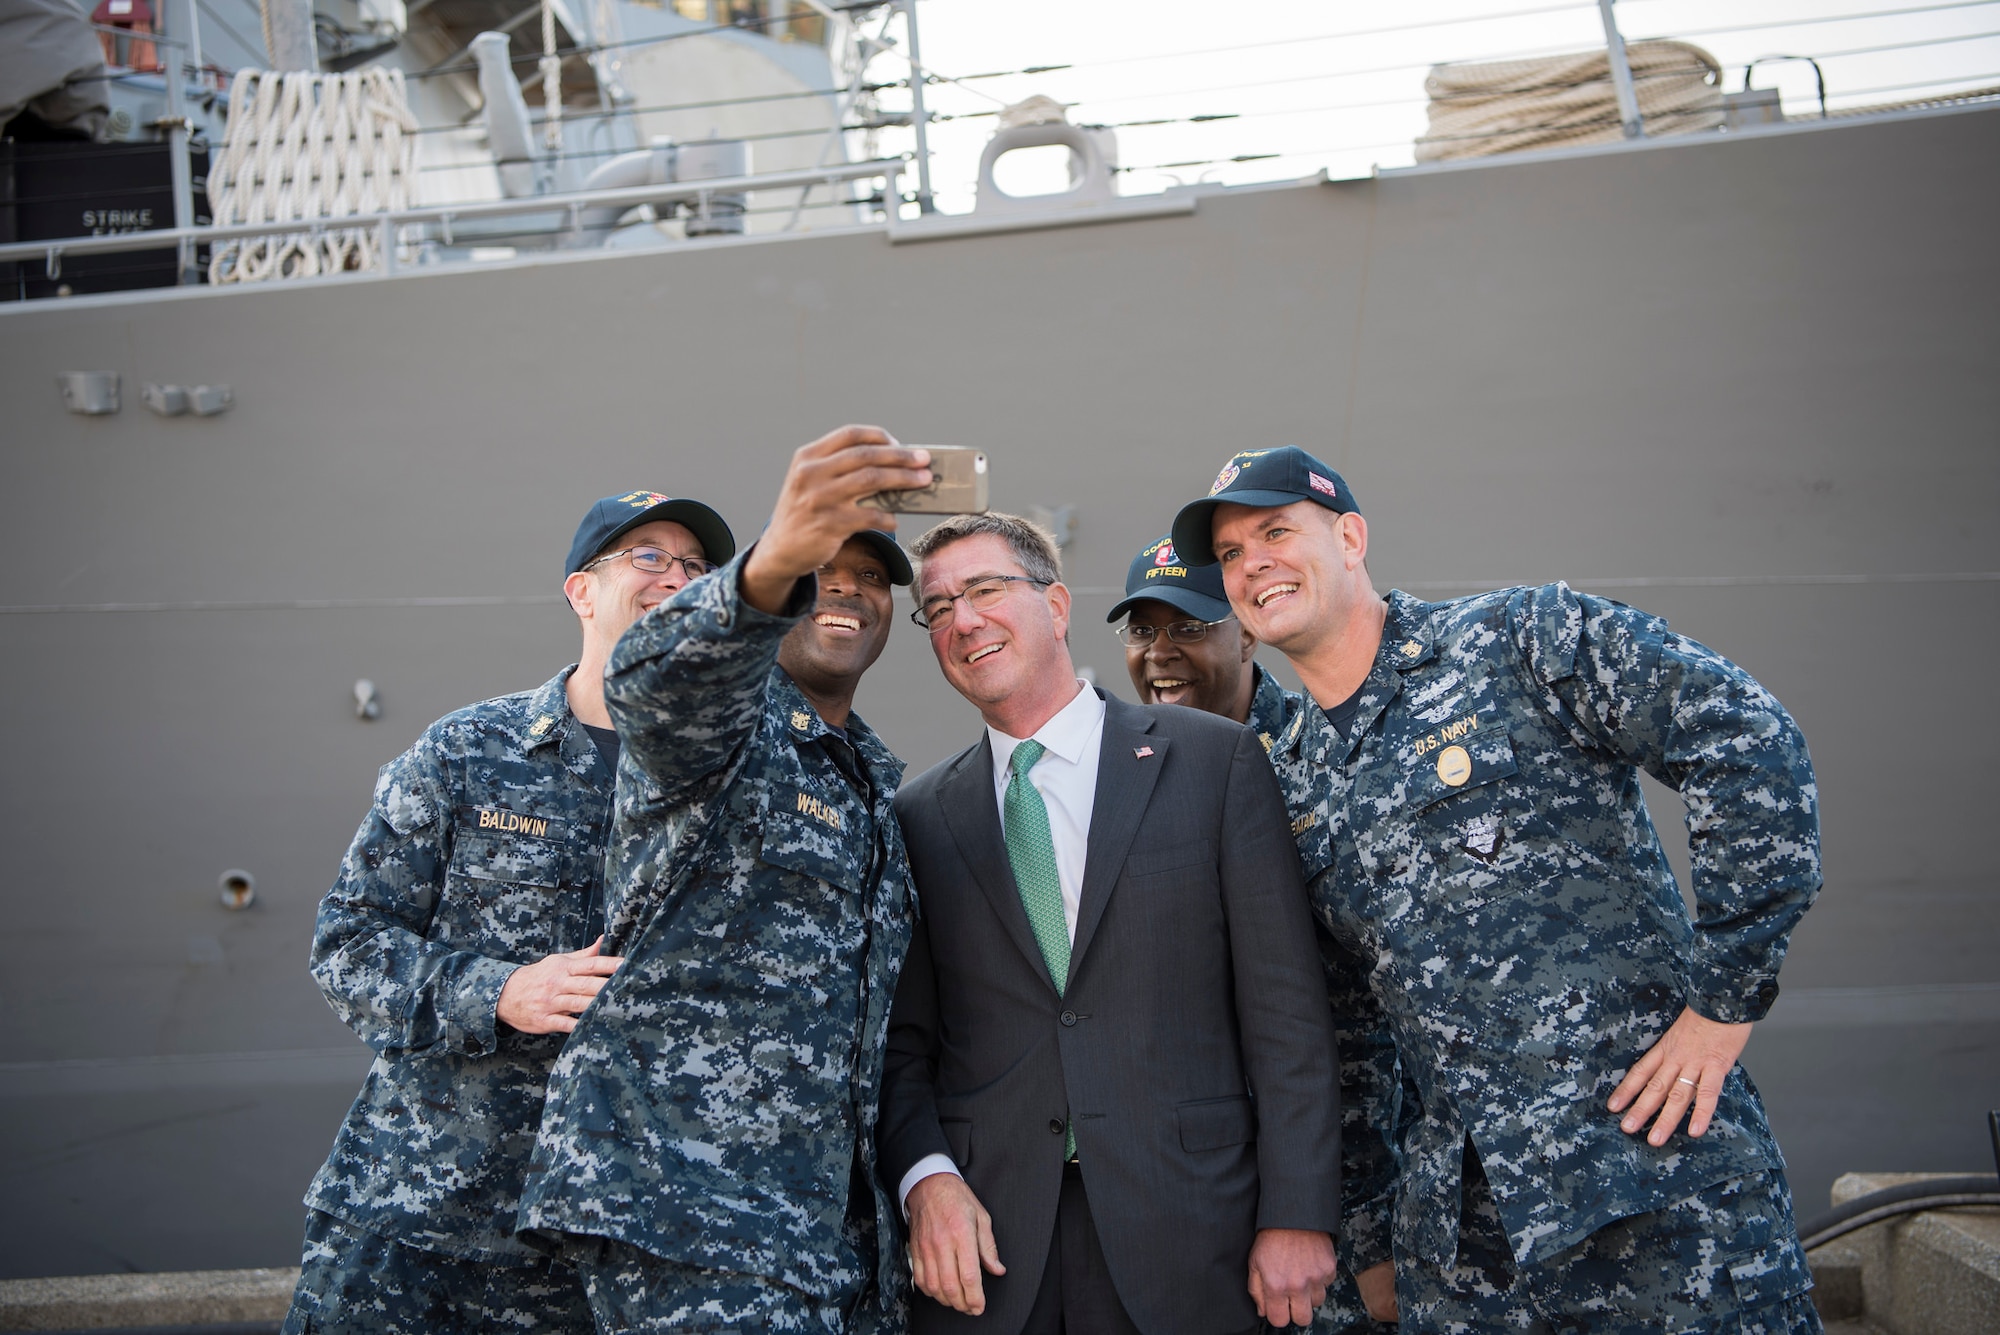 Defense Secretary Ash Carter meets with master chief petty officers from the guided-missile cruiser USS John C. McCain at Naval Base Yokosuka, Japan, Dec. 6, 2016. DOD photo by Air Force Tech. Sgt. Brigitte N. Brantley